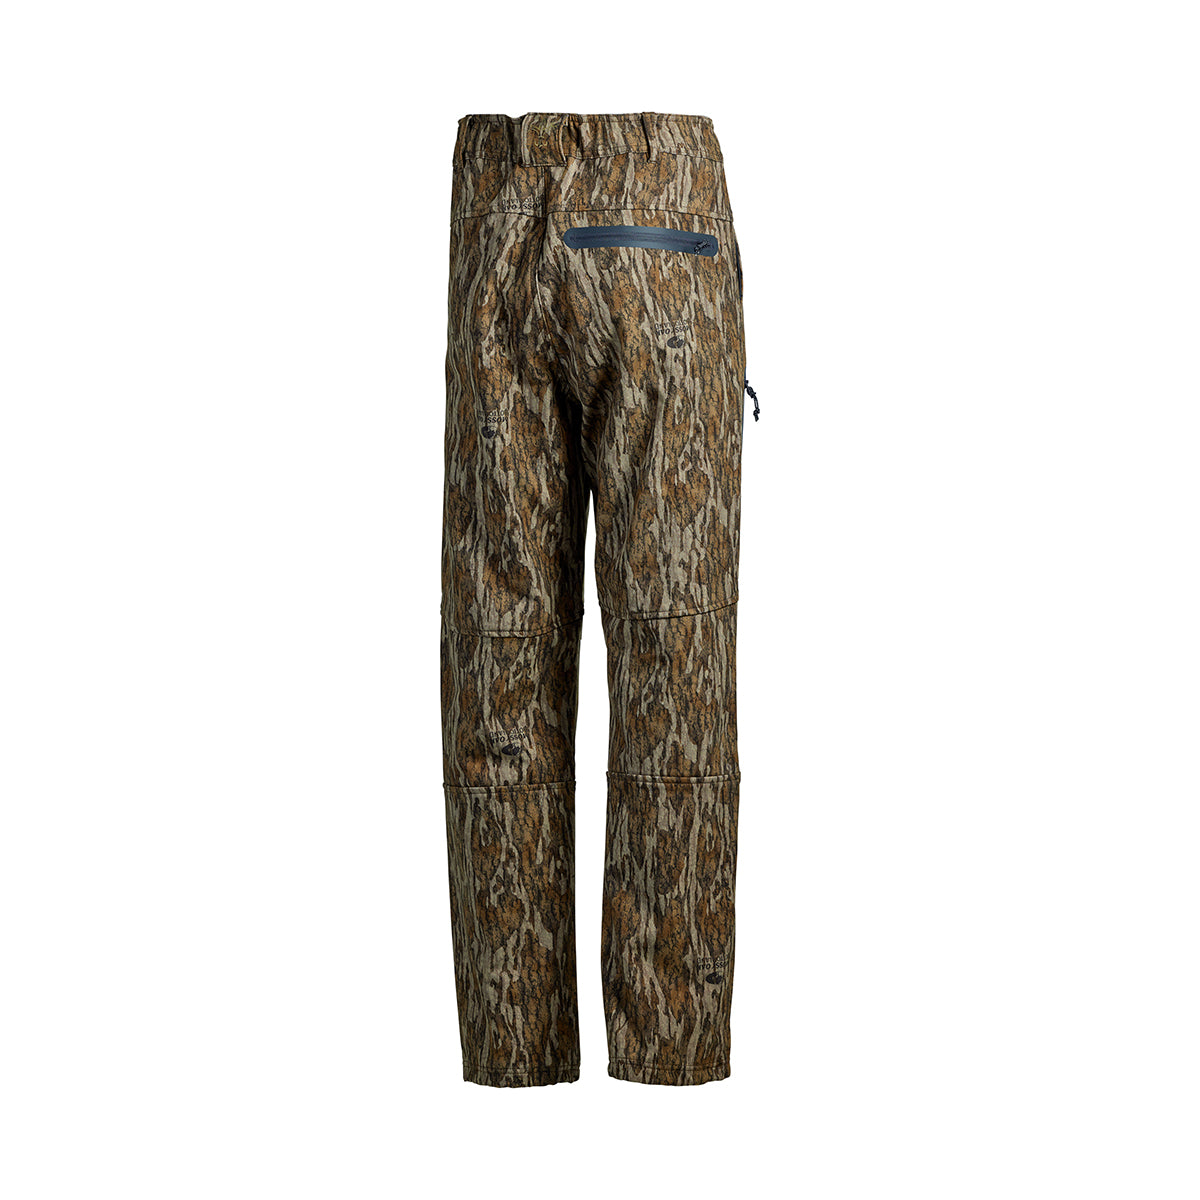 Sportsman W3 Water and Wind Resistant Hunting Pants